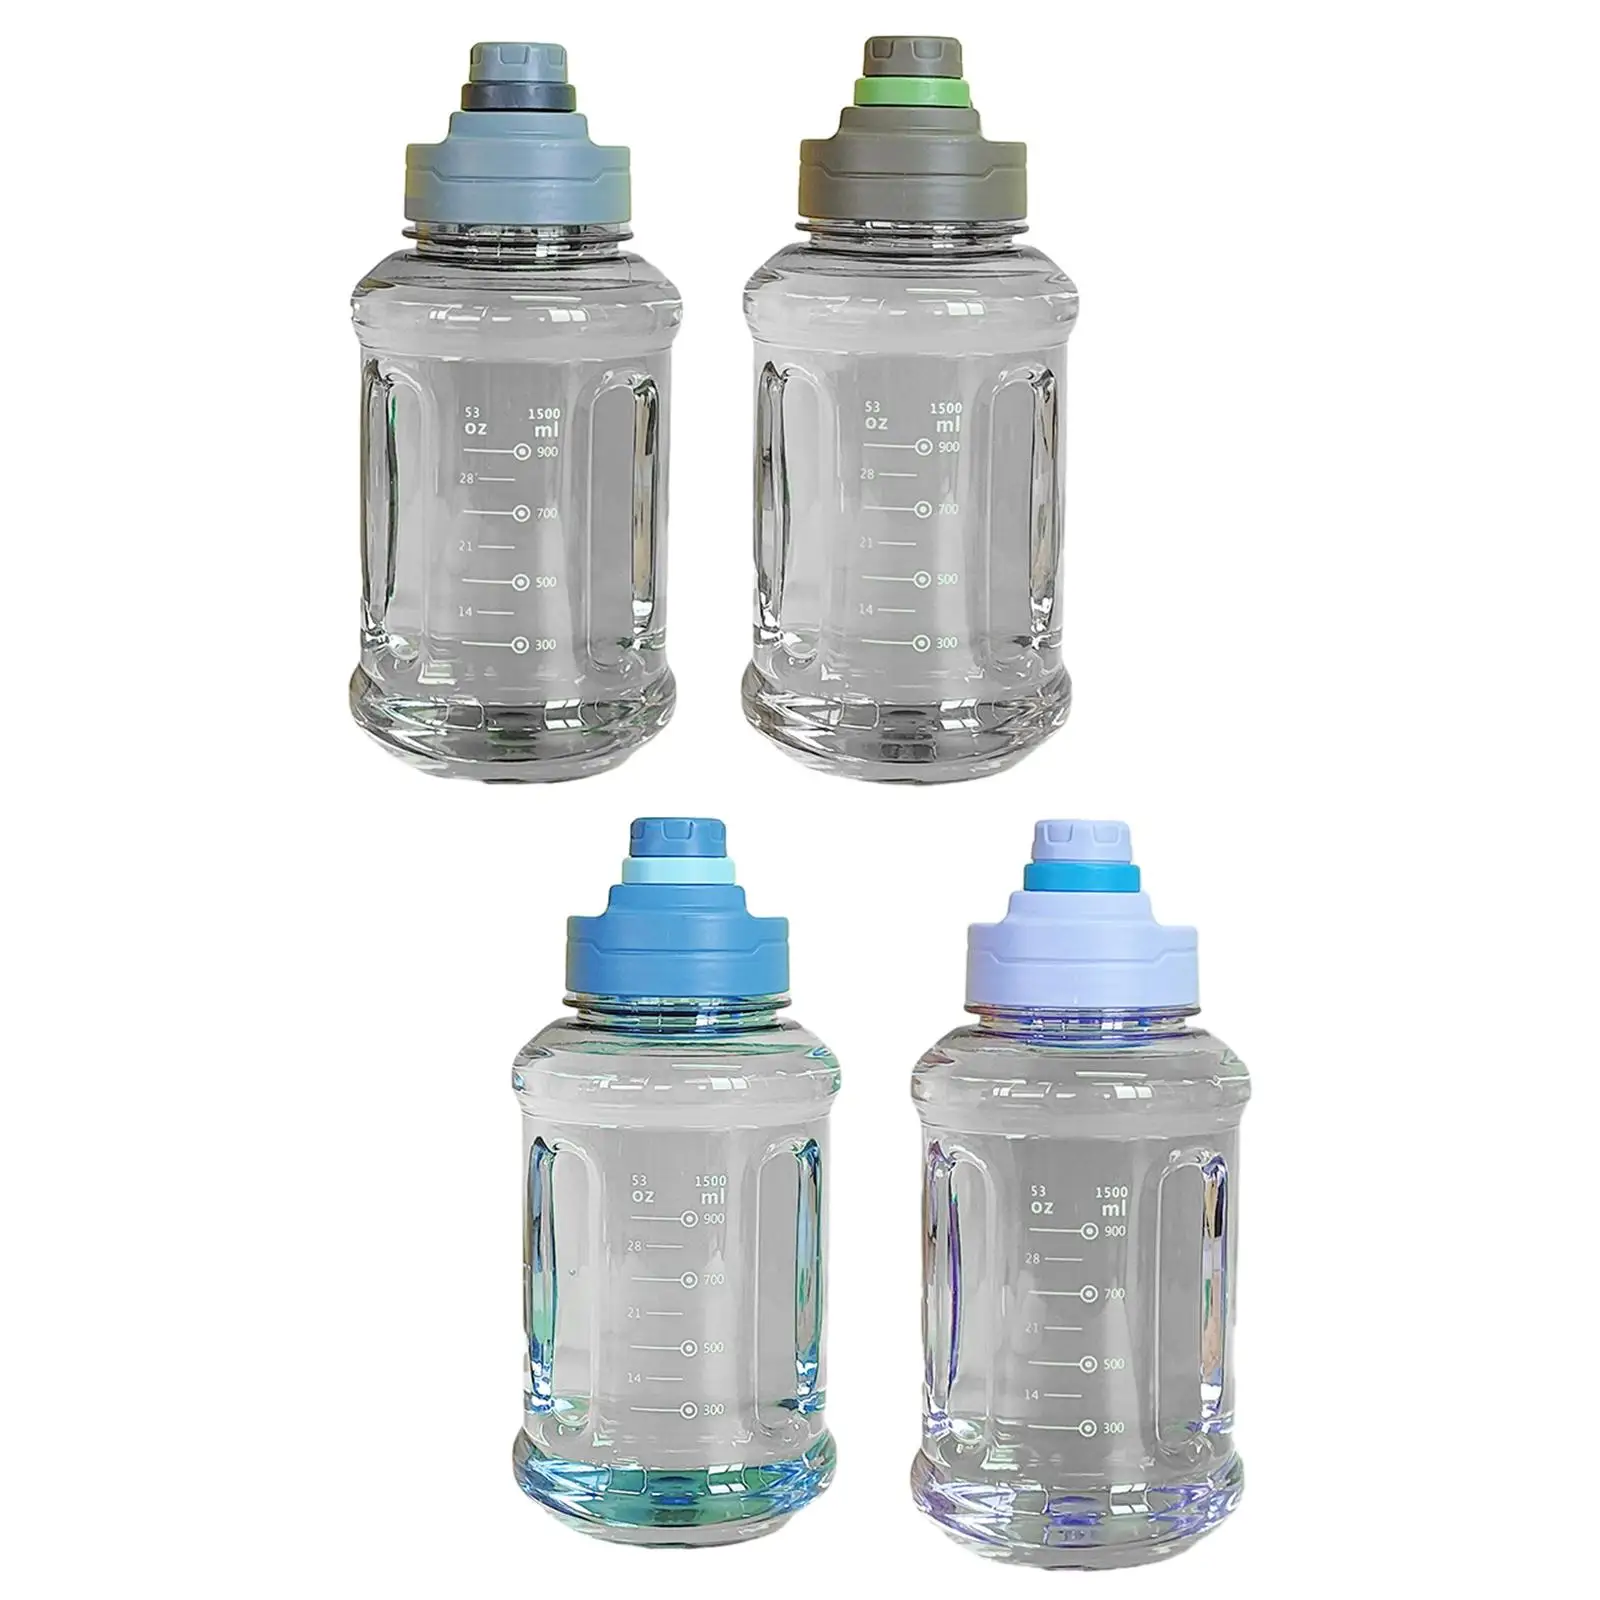 Big Water Bottle 1500ml Easy to Use Portable Fitness Accessories Gym Bottle